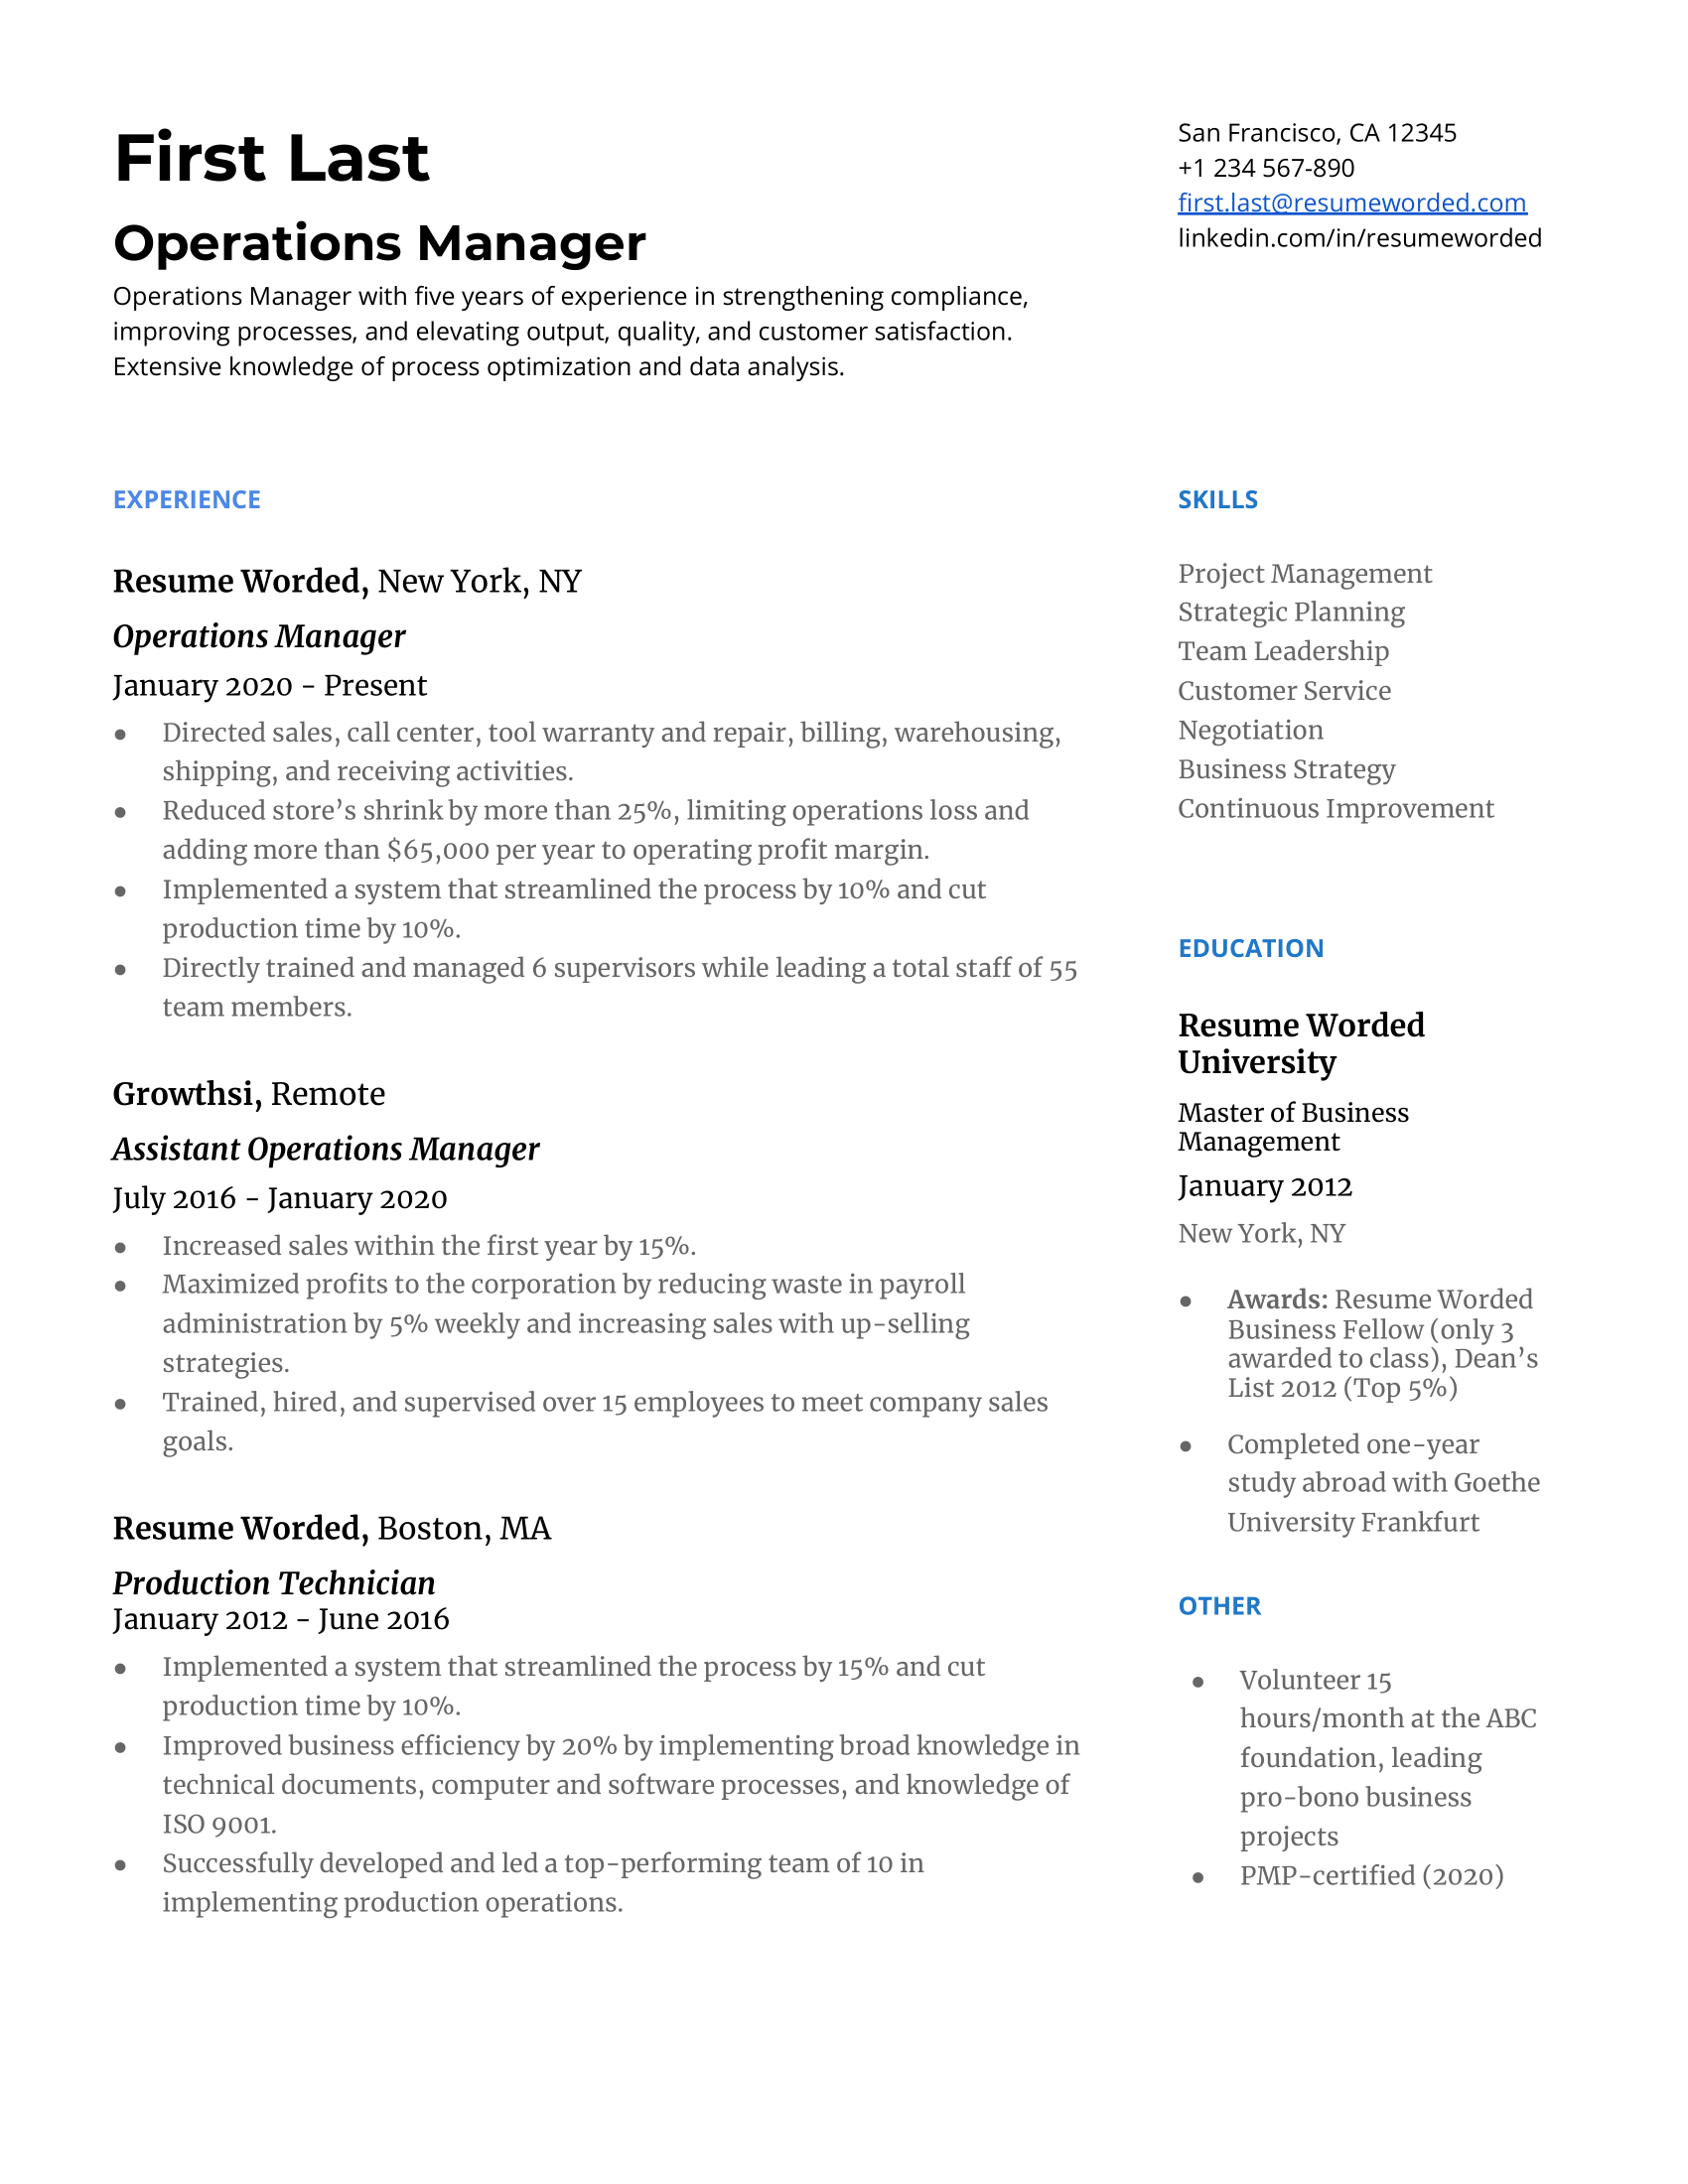 Operations Manager Resume Sample